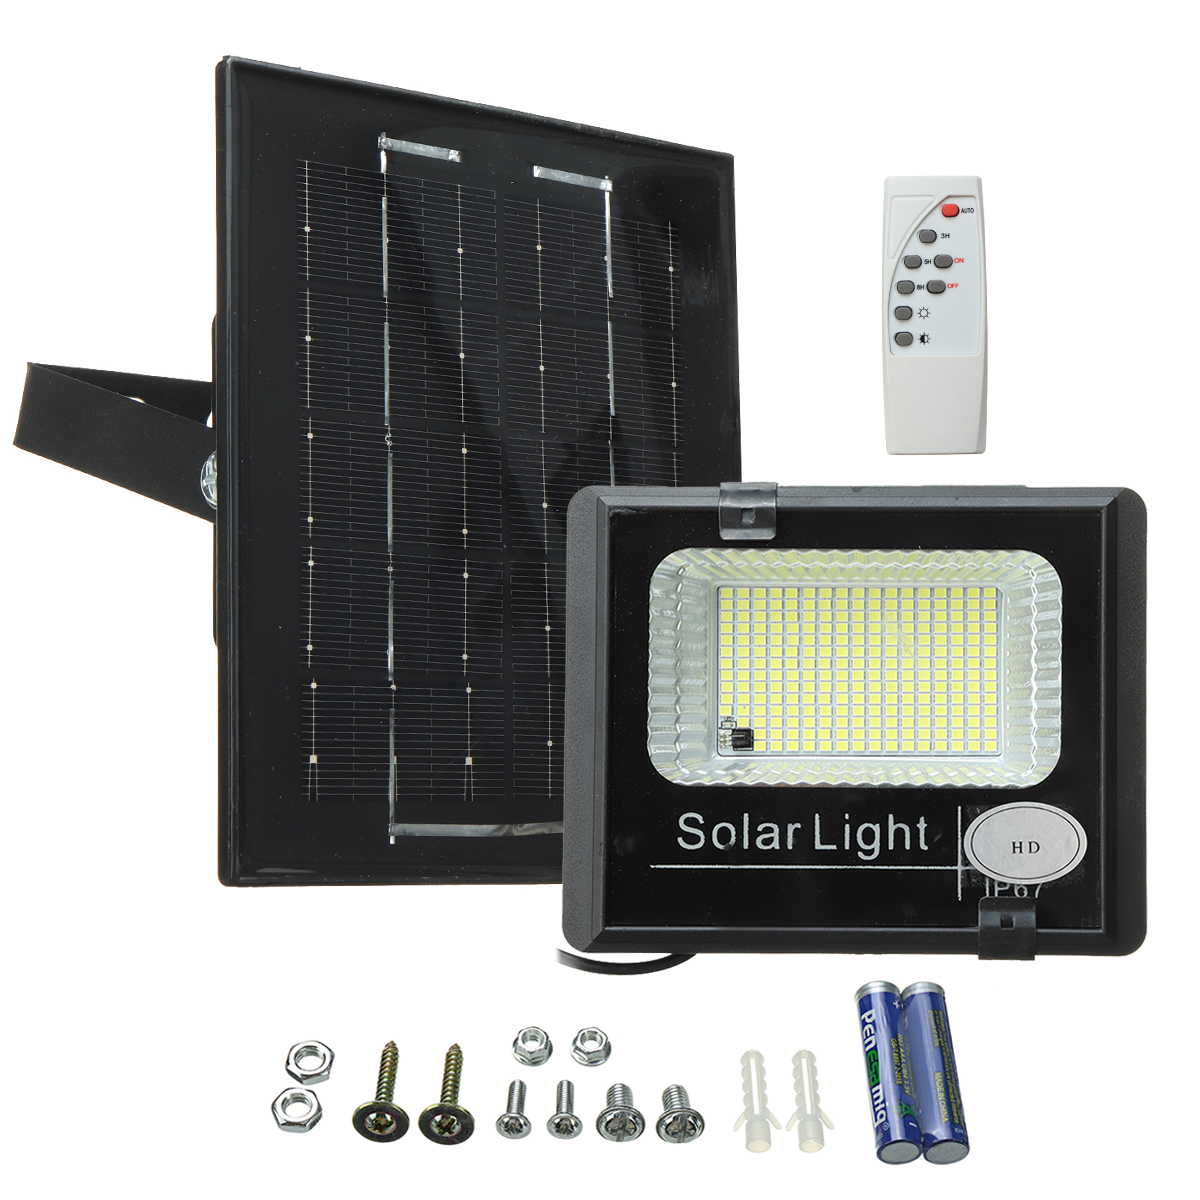 LED-Solar-Flood-Light-with-Remote-Control-Wall-Lamp-IP67-Waterproof-Solar-Powered-Lamp-for-Outdoor-G-1880477-7